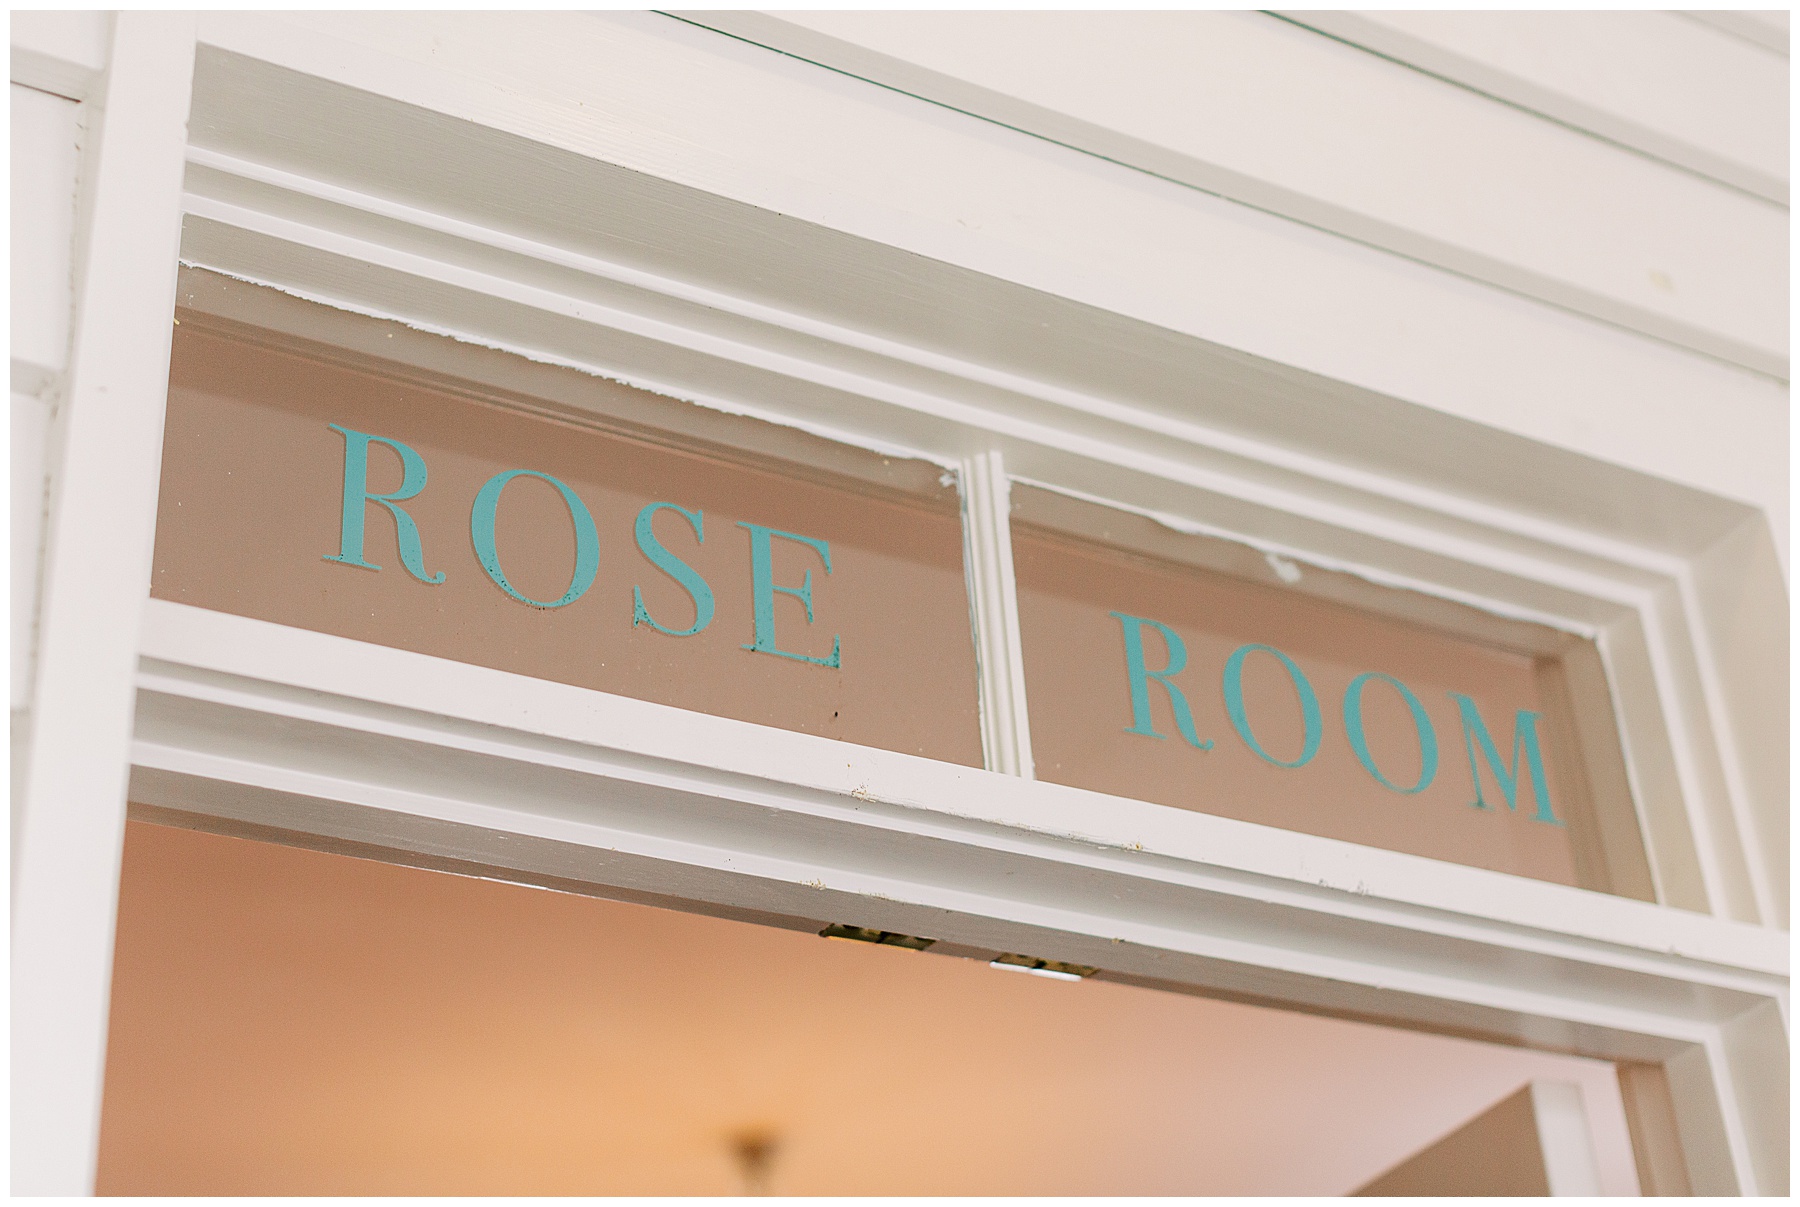 teal letters on glass window above door say "Rose Room" at the Post House Inn 